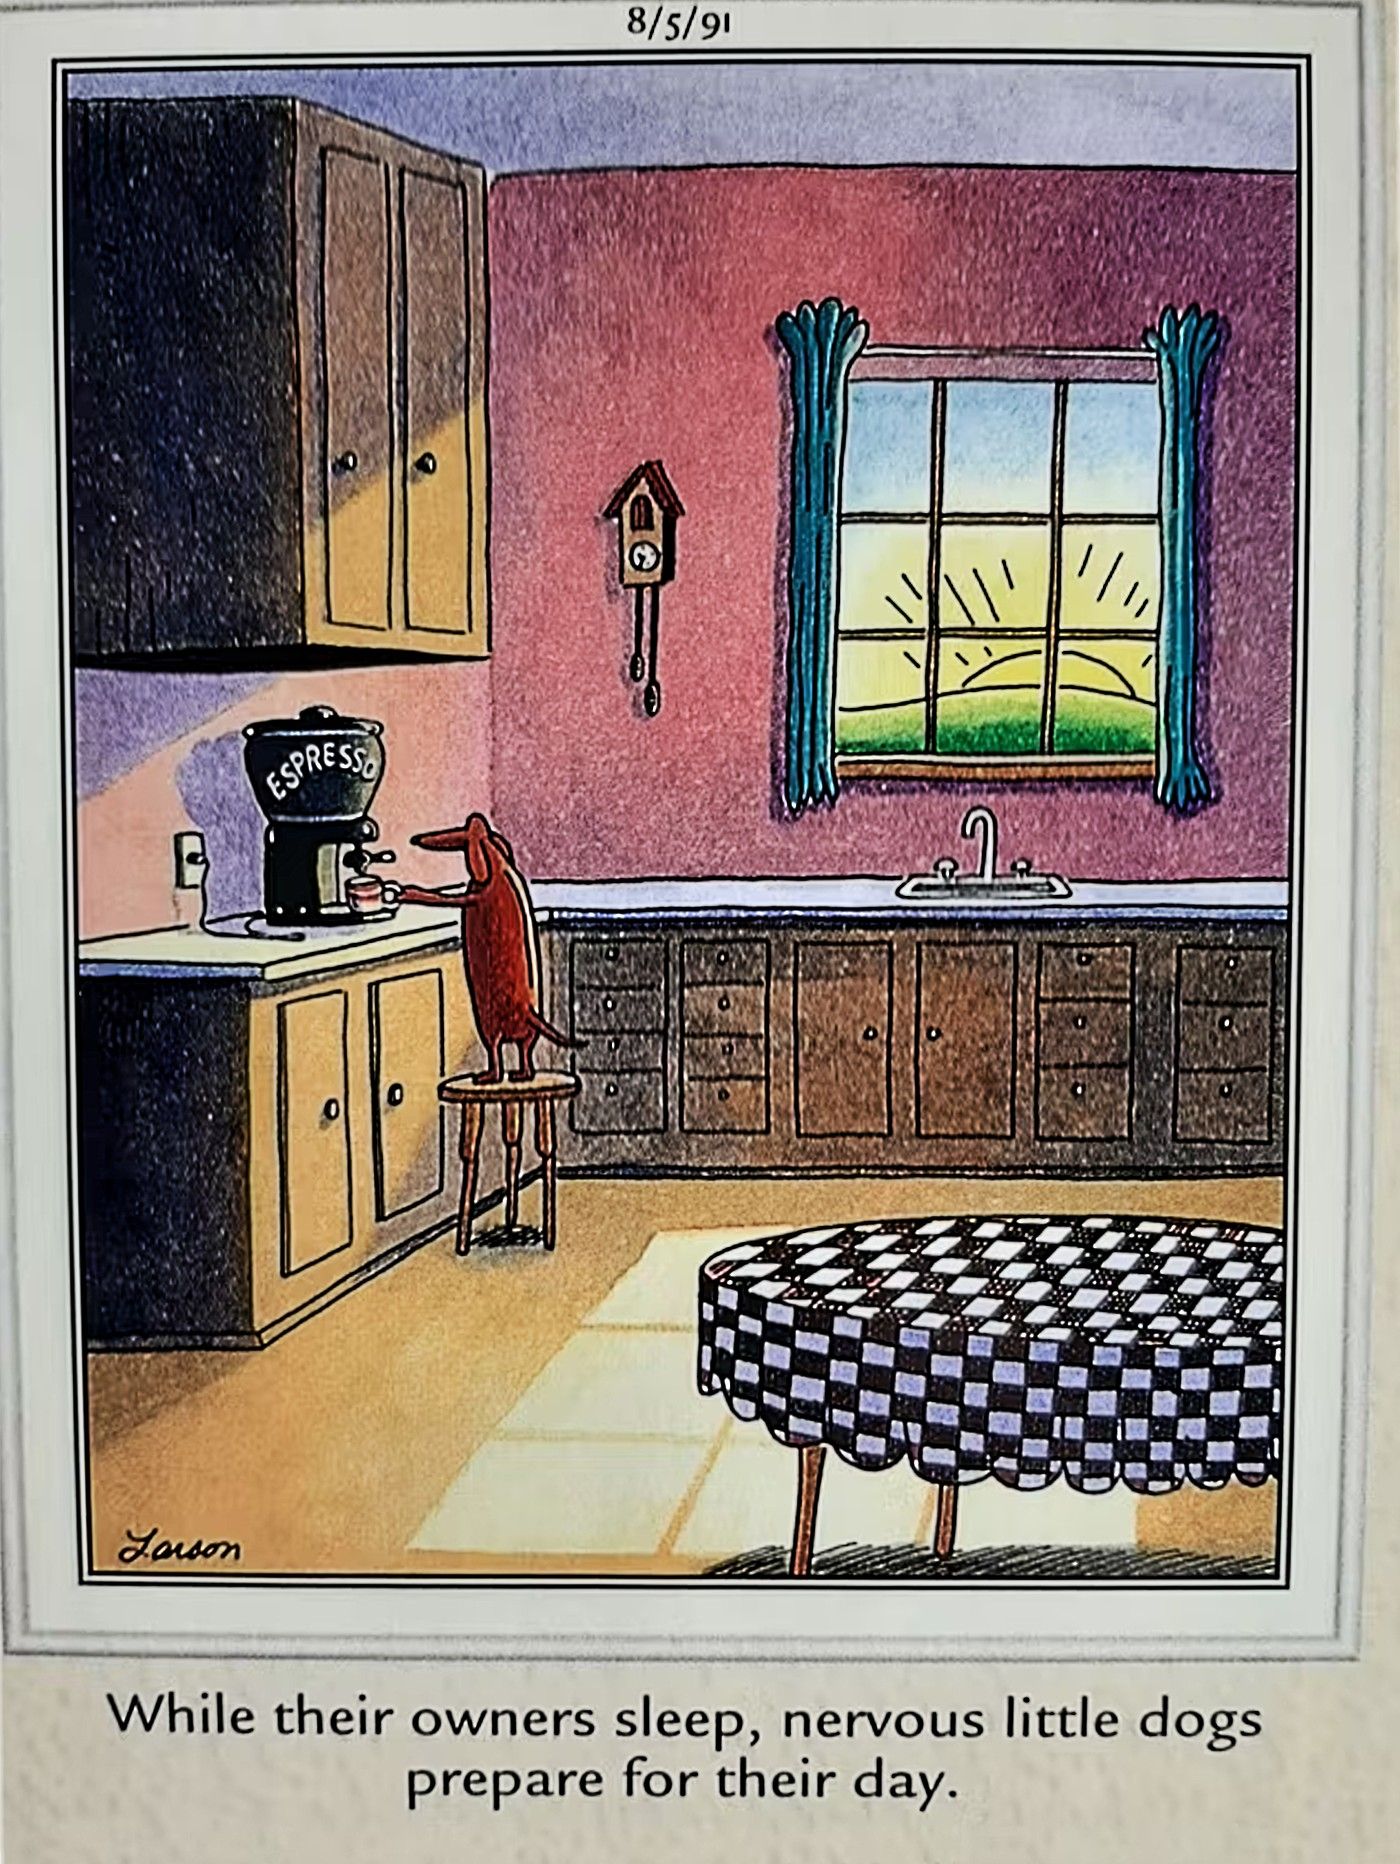 Far Side, dog in the kitchen making coffee before owners wake up